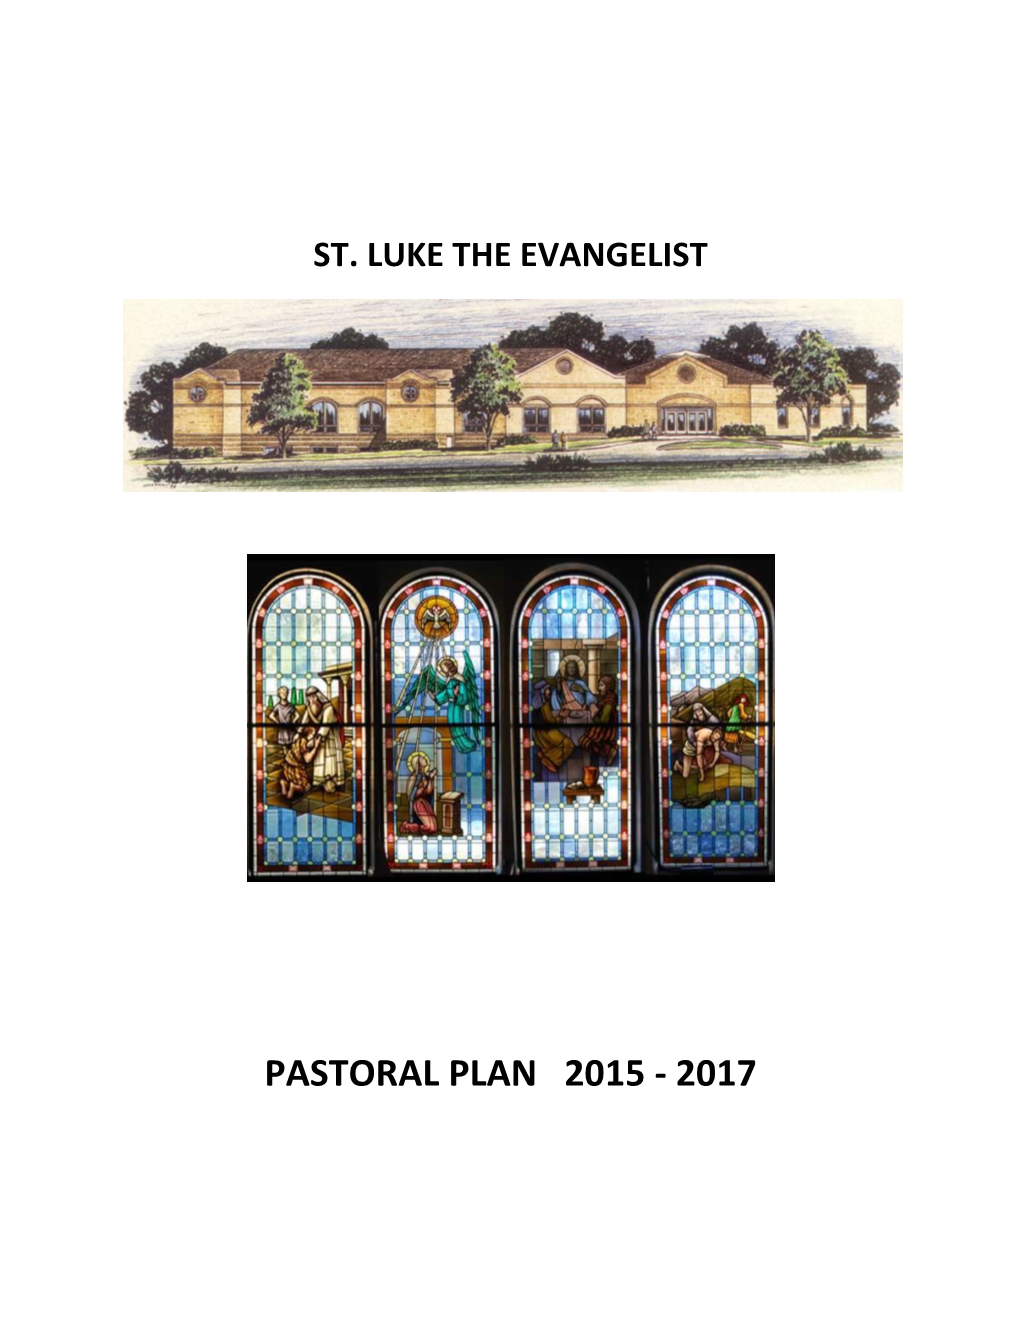 Pastor/Parish Council Statement of Purpose and Content of Plan